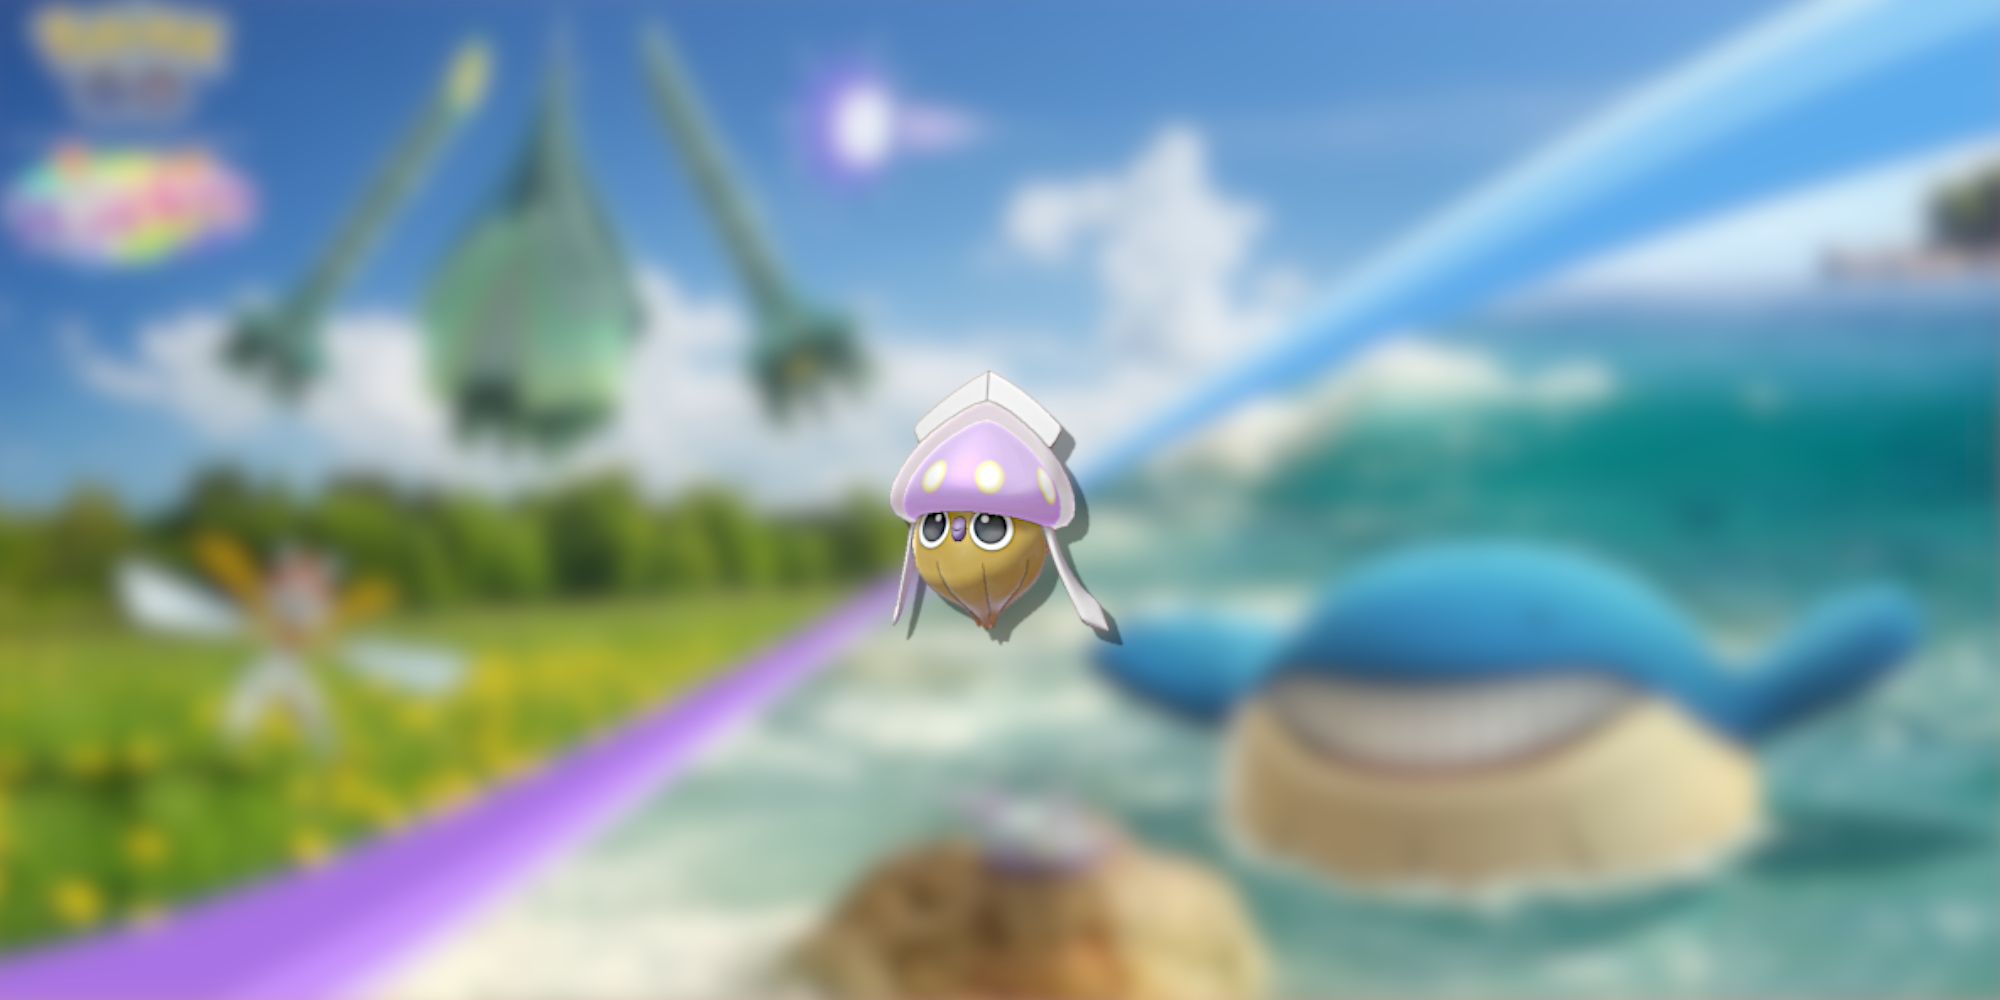 Image of the Pokemon Inkay in the foreground and the World of Wonders event in the background from Pokemon GO